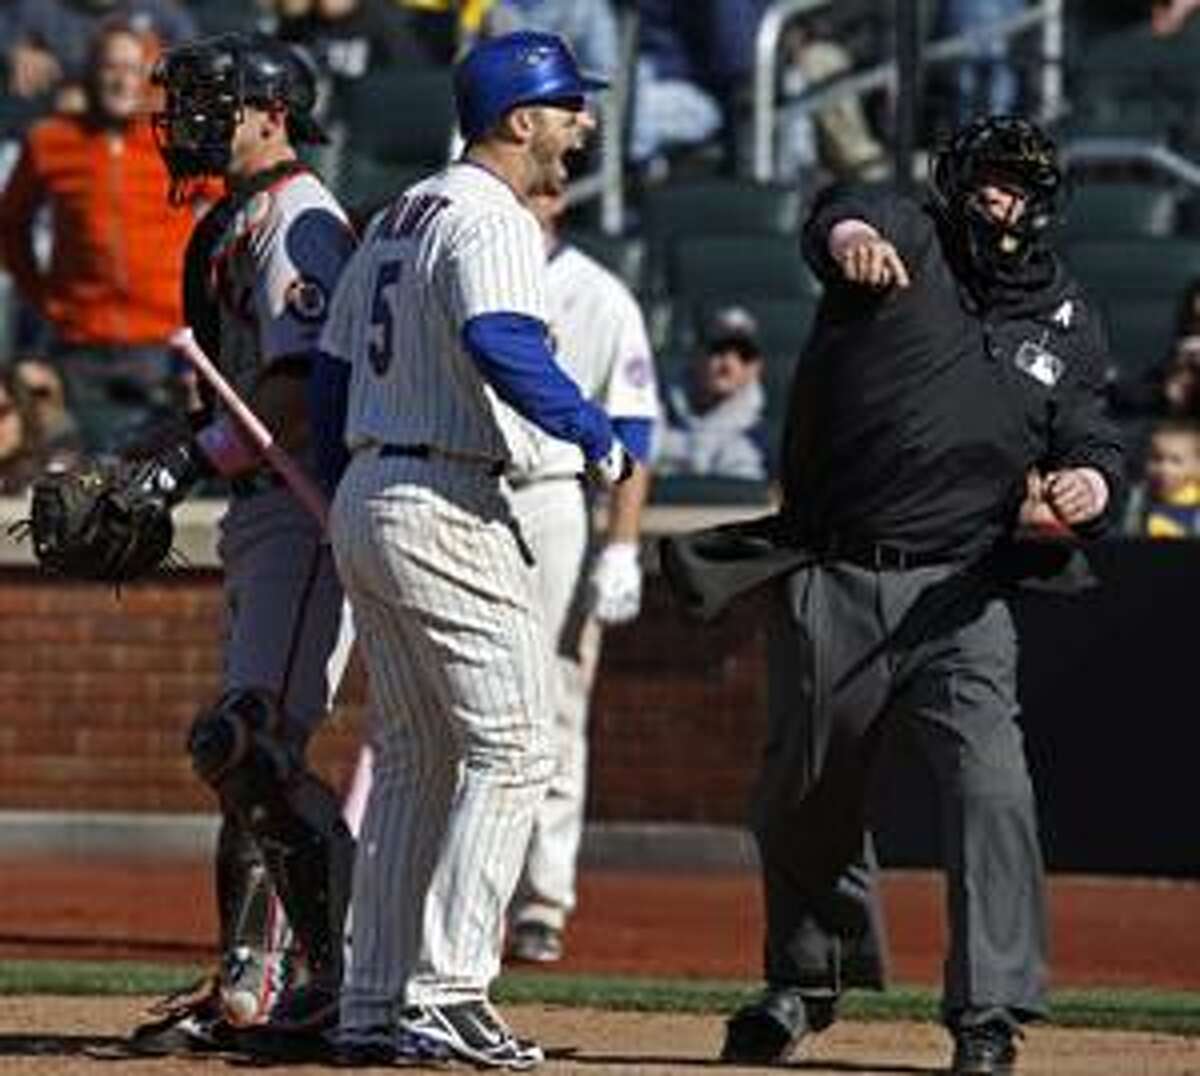 AP Home plate umpire Paul Schrieber, right, ejects New York Mets third baseman David Wright (5) for arguing a called third strike for in the bottom of the ninth inning in the Mets' 6-5 loss to the San Francisco Giants Sunday at Citi Field in New York. Giants catcher Eli Whiteside, left, looks on.